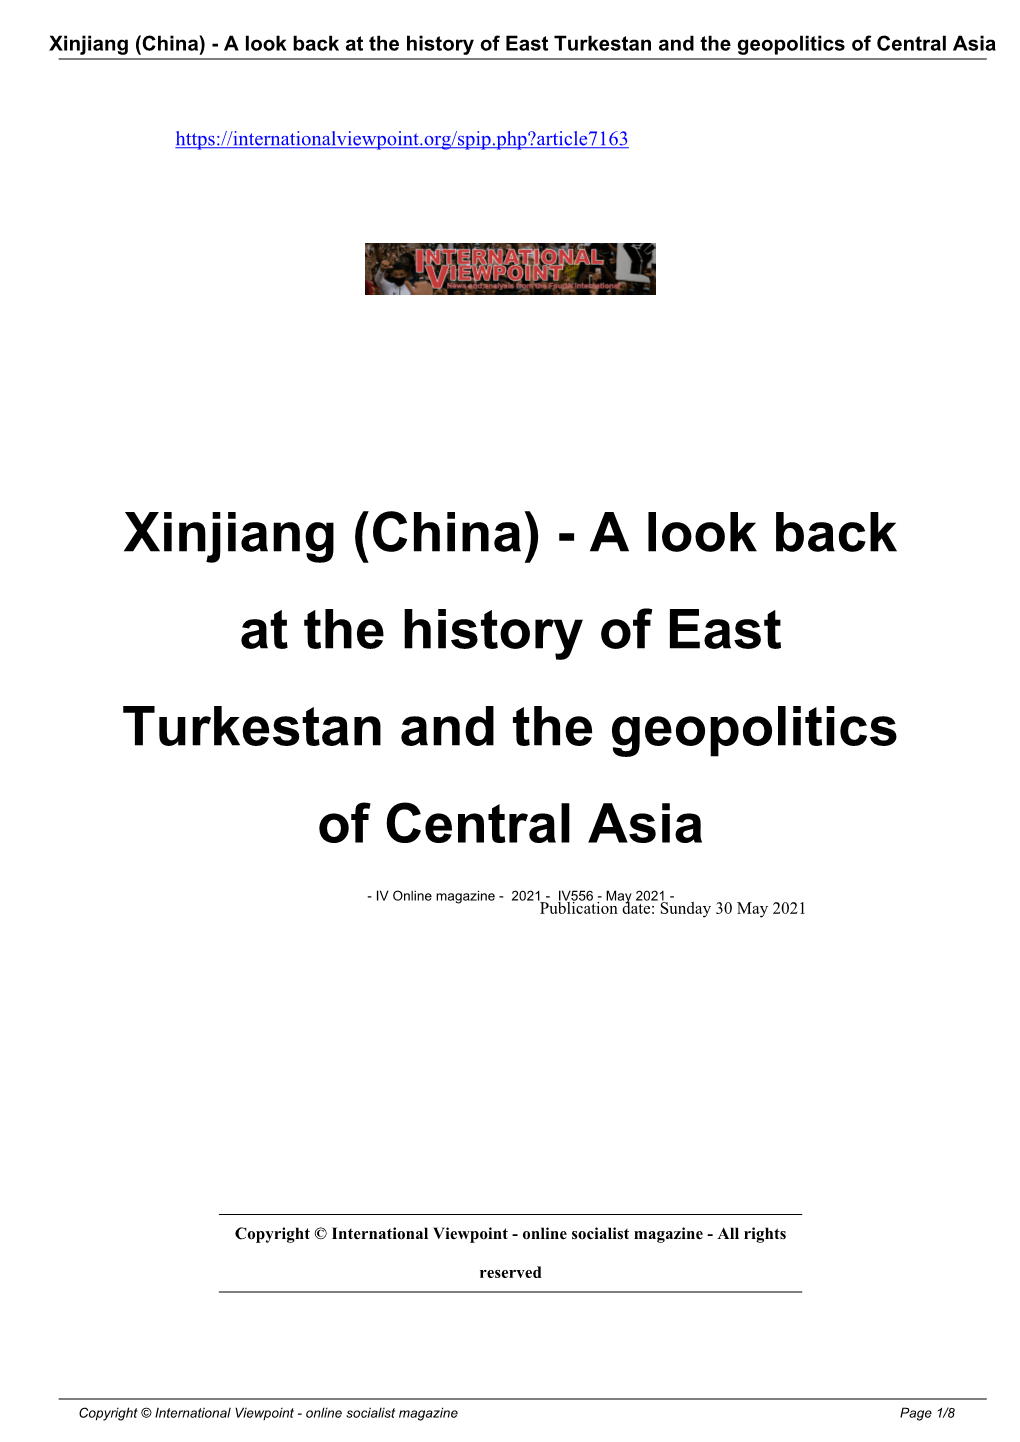 Xinjiang (China) - a Look Back at the History of East Turkestan and the Geopolitics of Central Asia